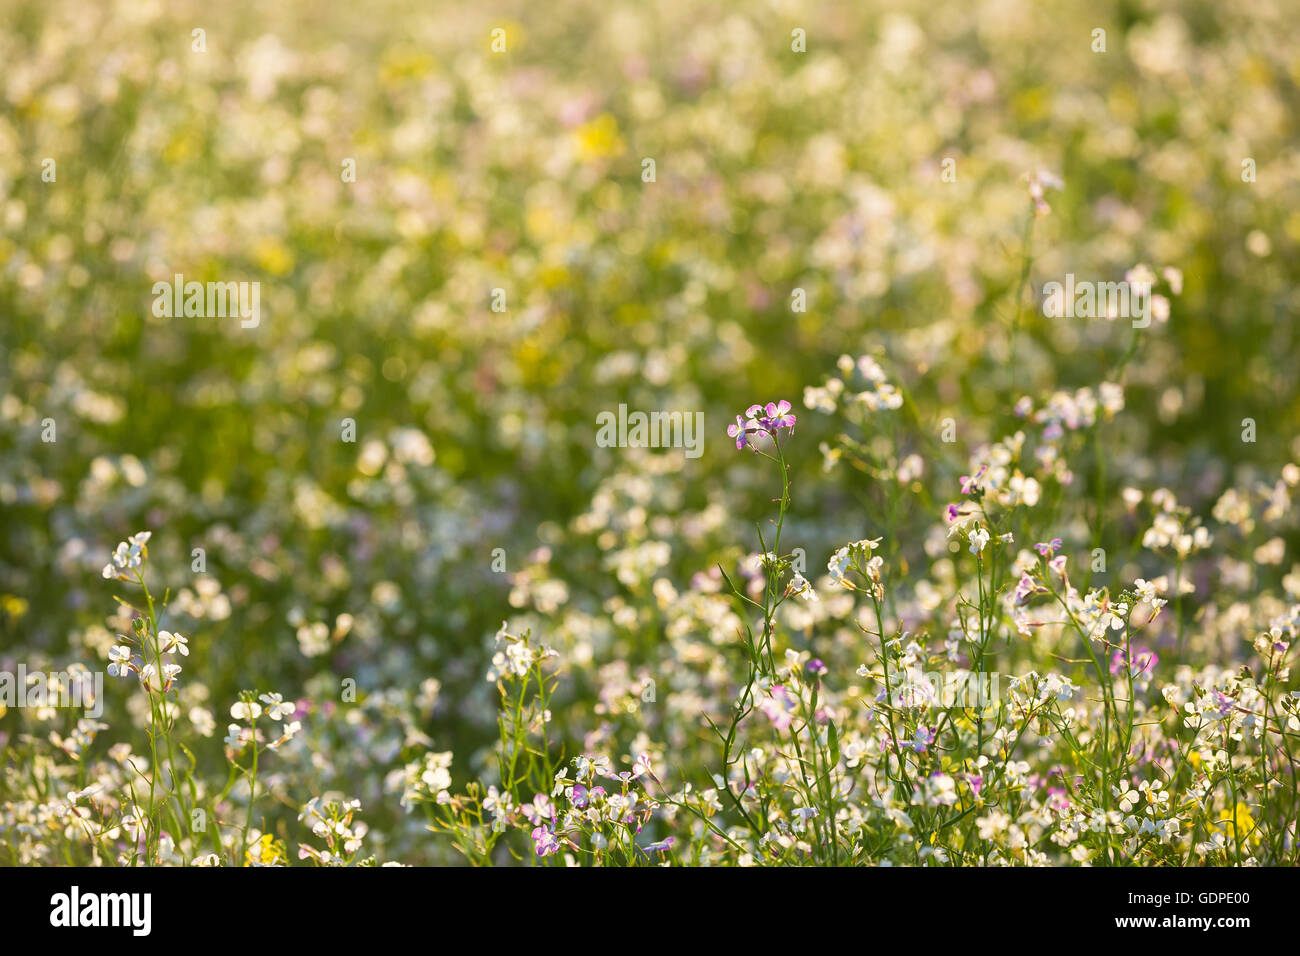 Green Field With Flowering Wild Radish Or Jointed Charlock Or Cultivated Radish. Early Summer. Agricultural Background. Raphanus Stock Photo